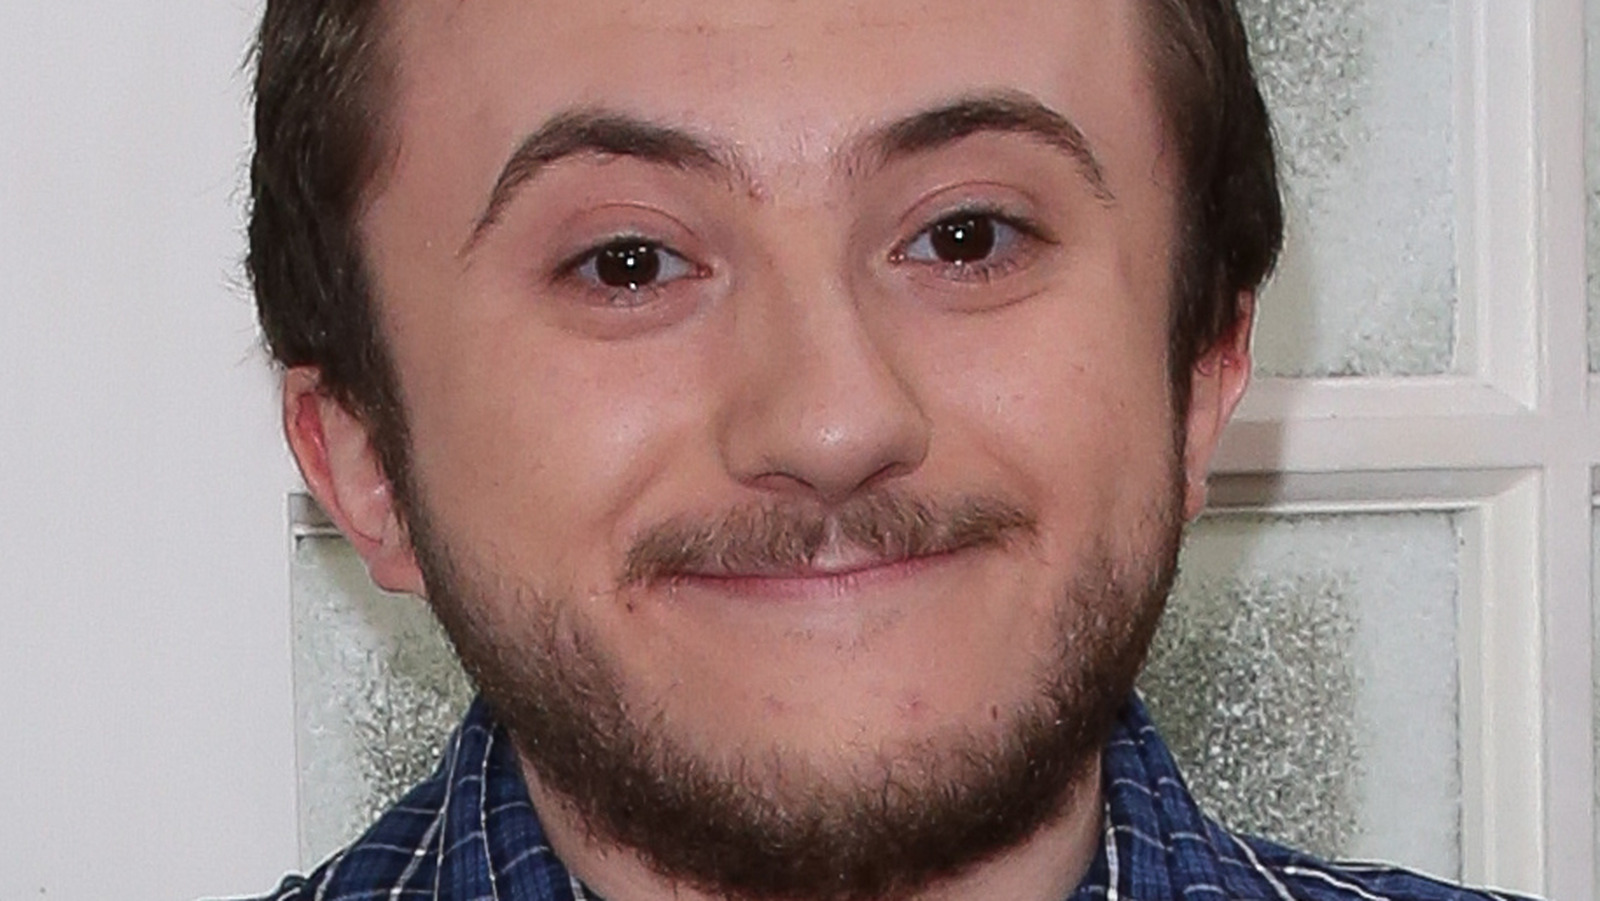 The Rare Medical Condition The Middle Star Atticus Shaffer Lives With